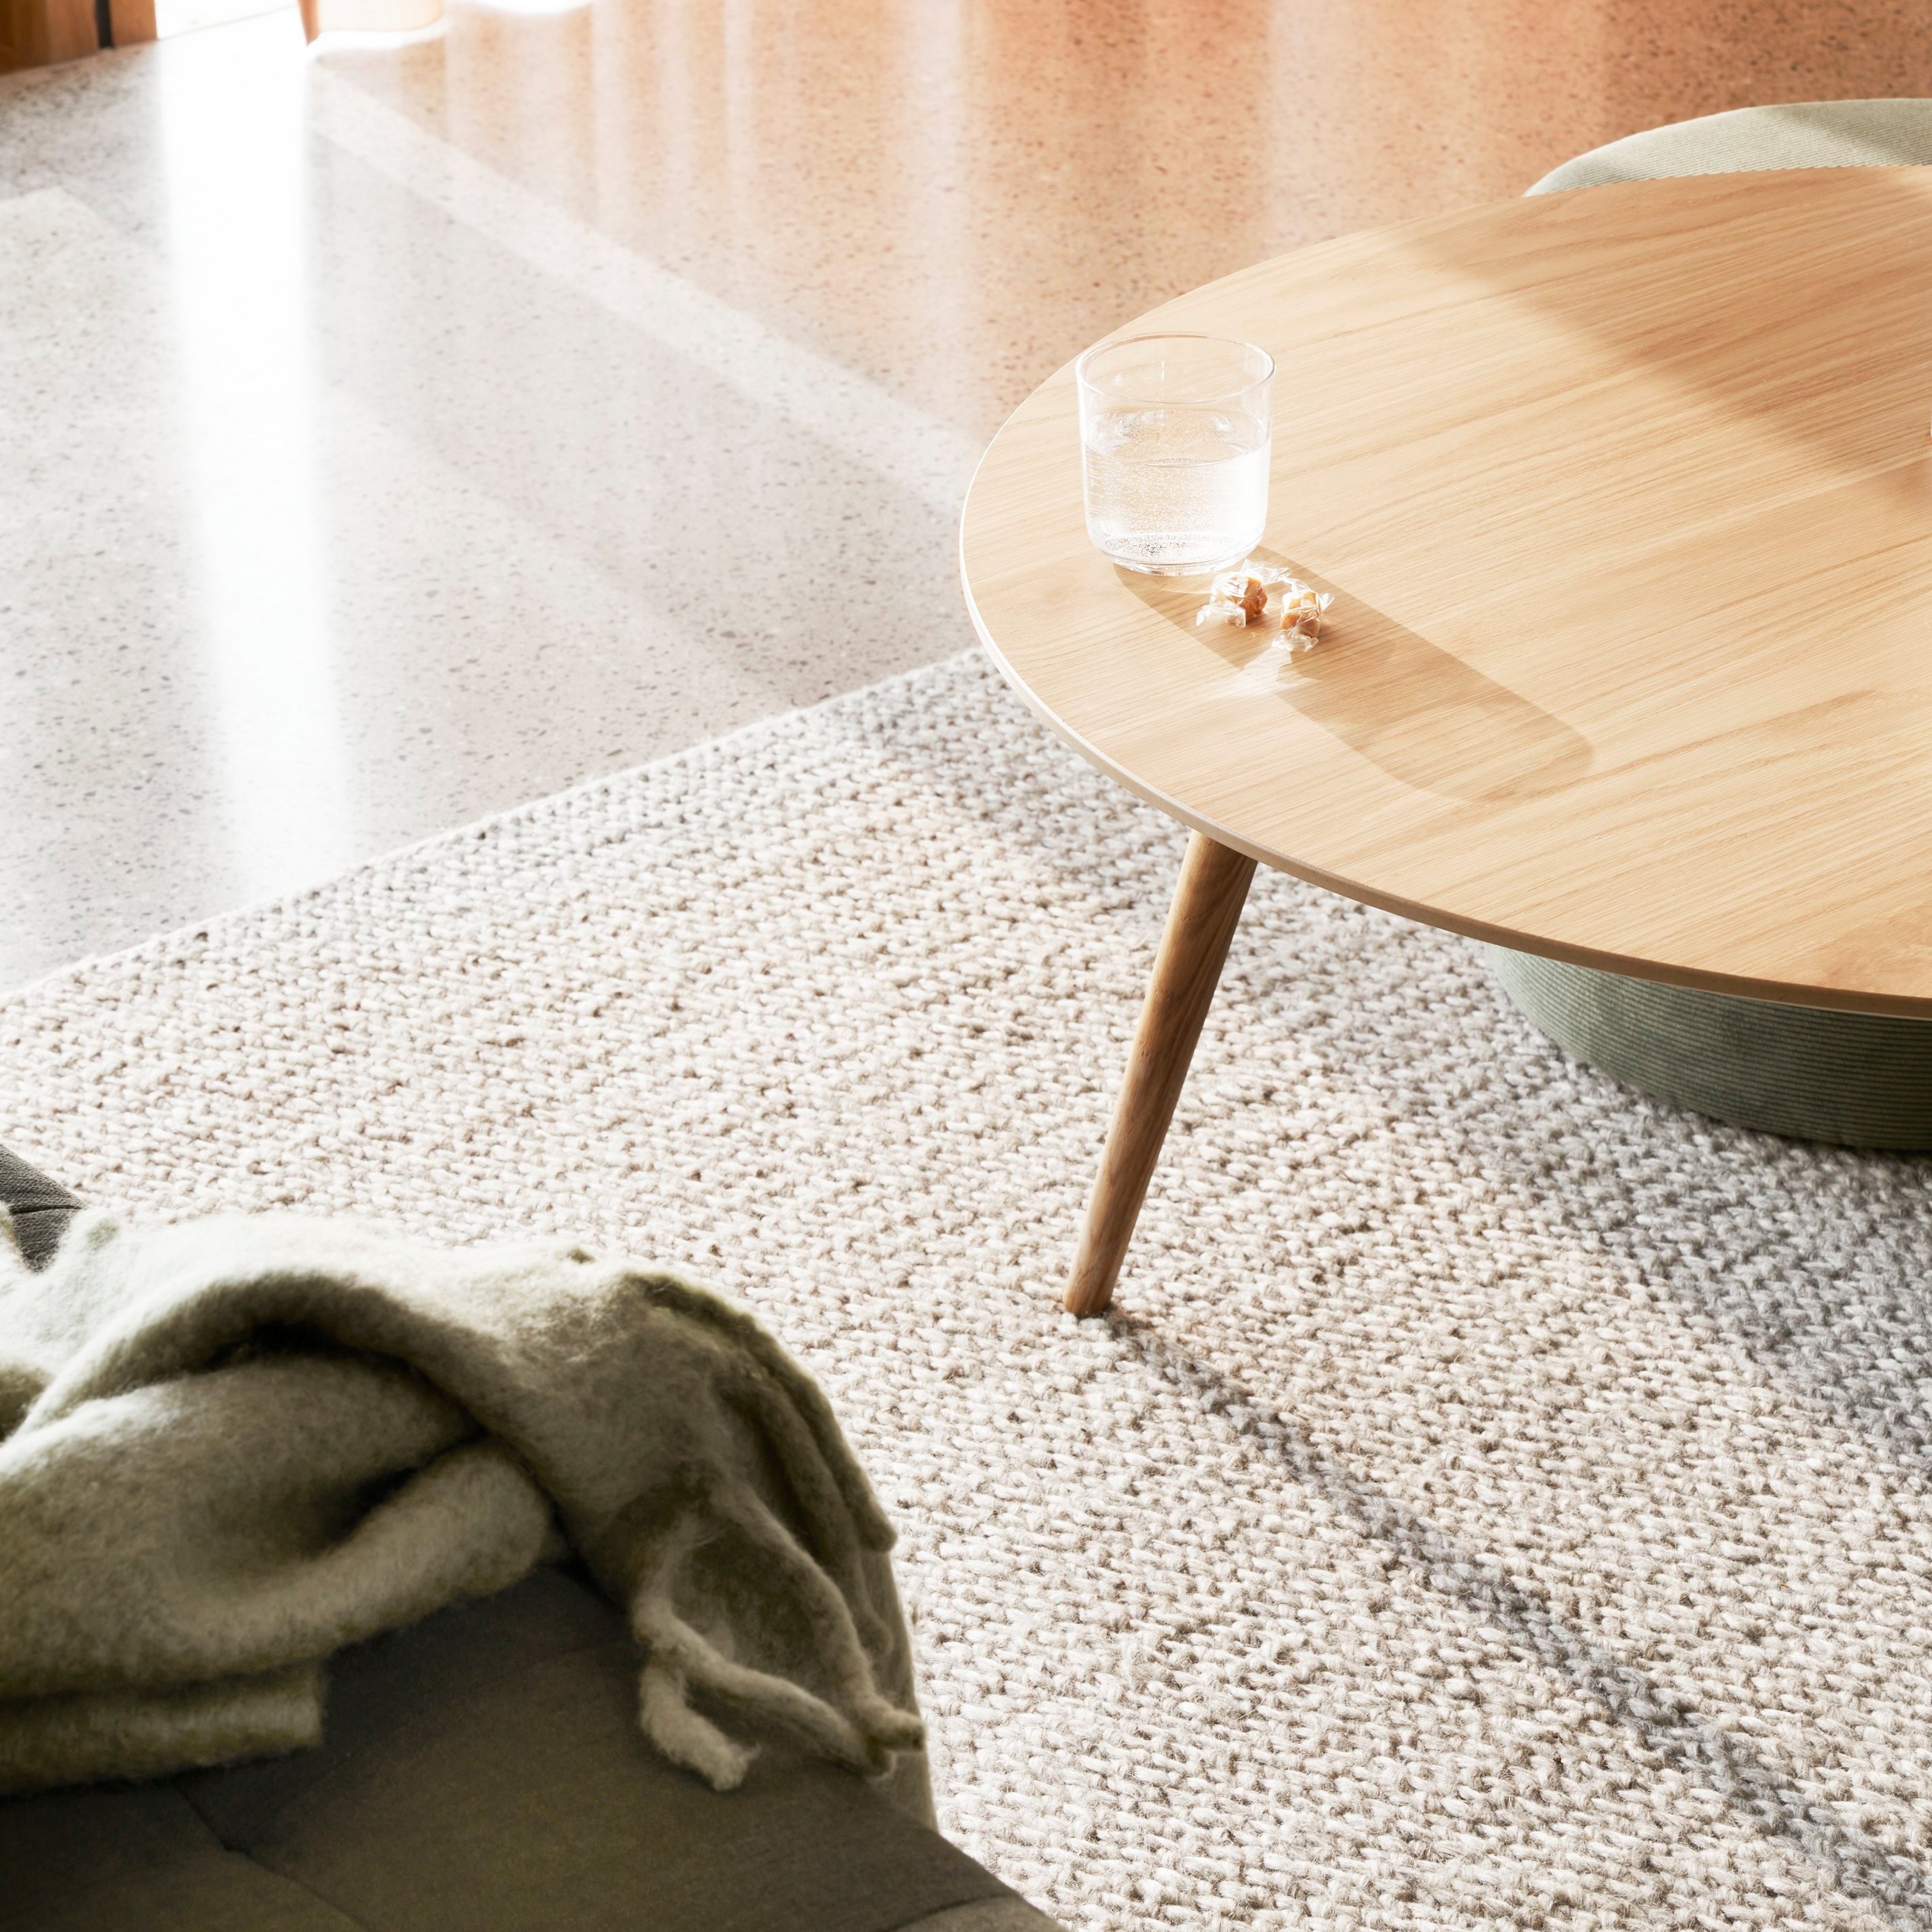 Textured rug with a round wooden table, glass of water, and a soft throw blanket in sunlight